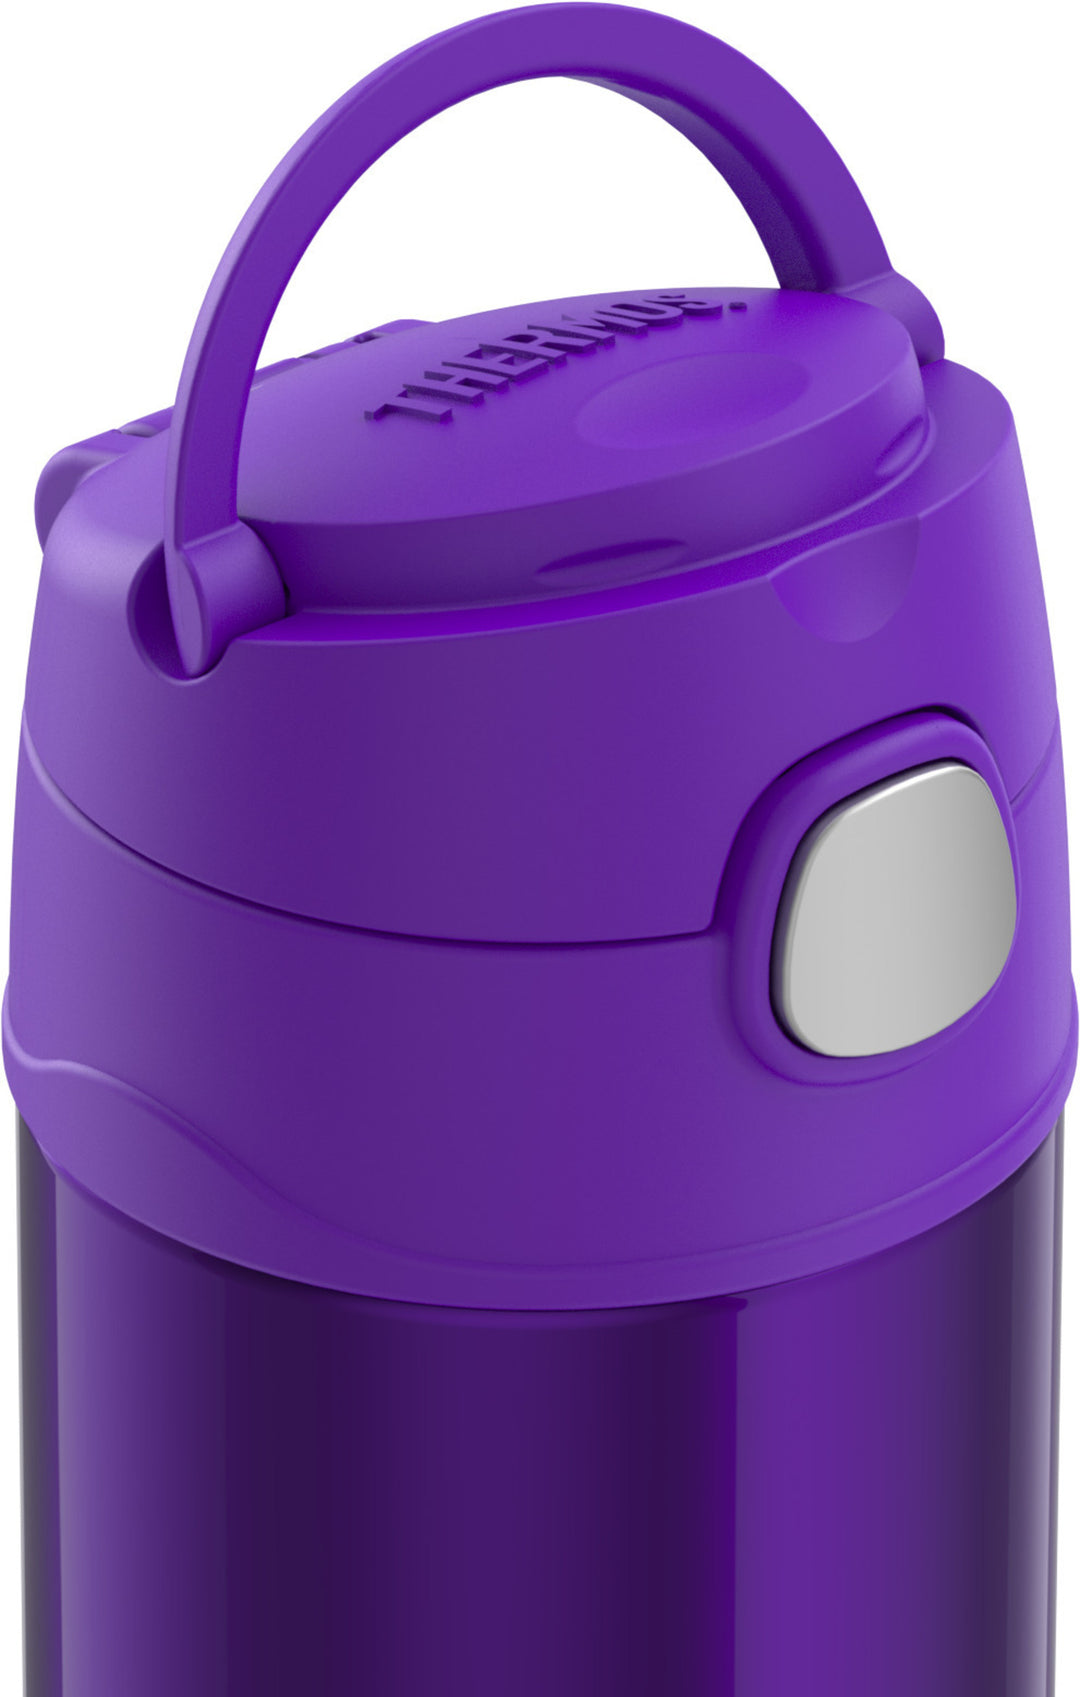 Thermos Funtainer Insulated Drink Bottle - Violet Purple